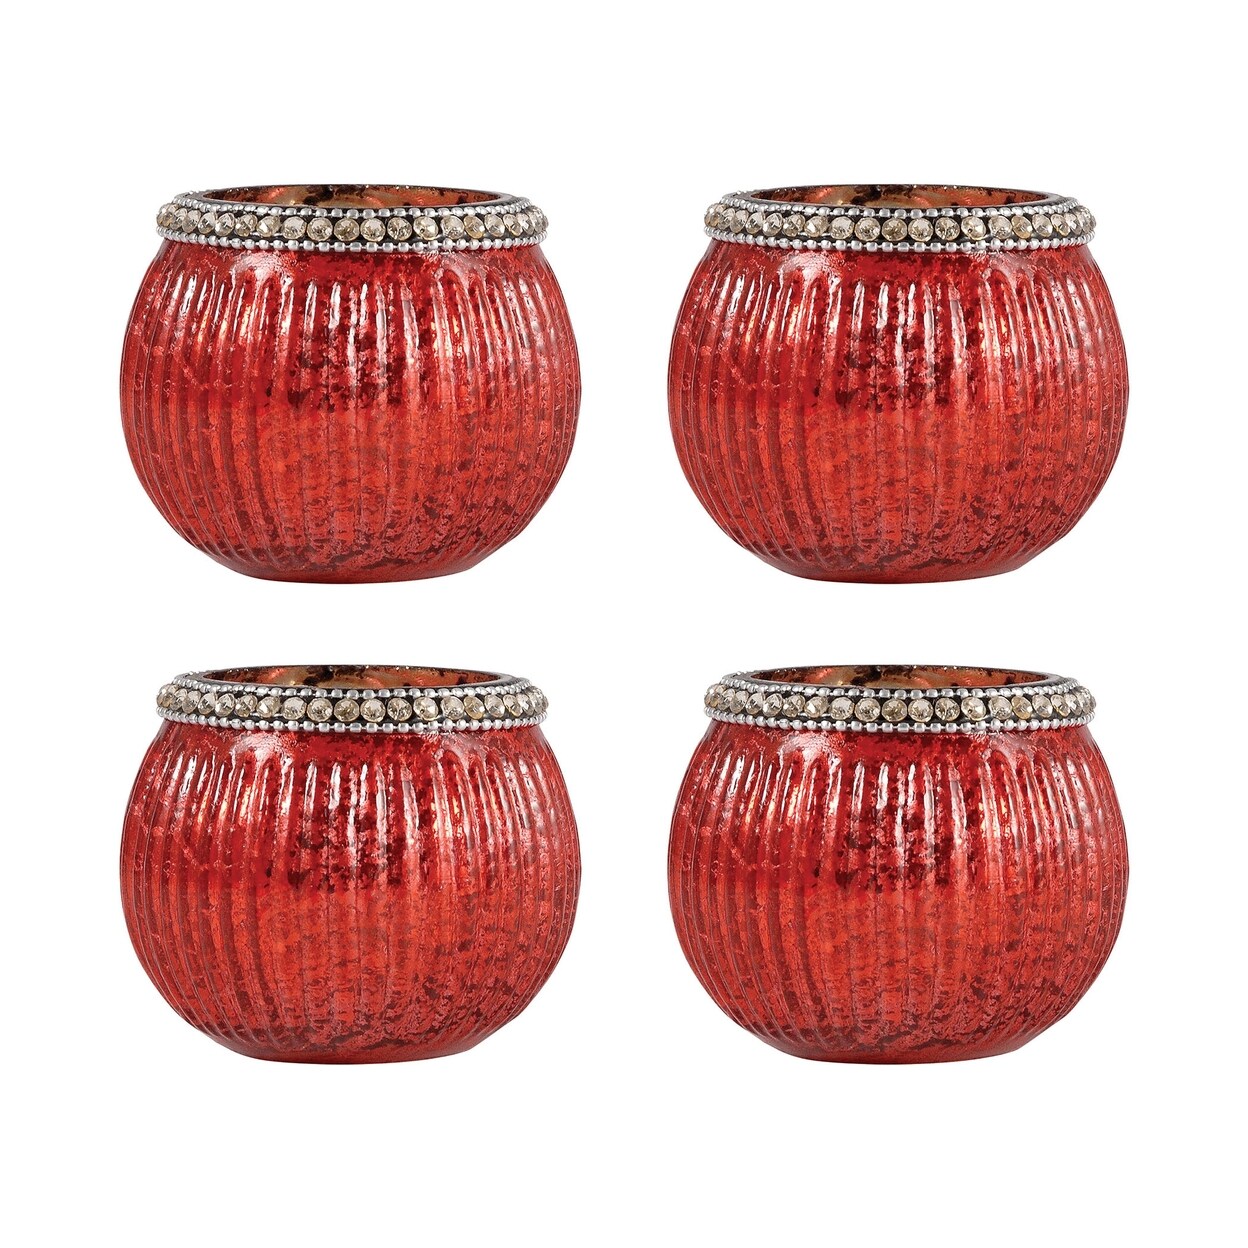 Marketplace Sterlyn 2.75-inch Votives (Set of 2) - Antique Red Artifact